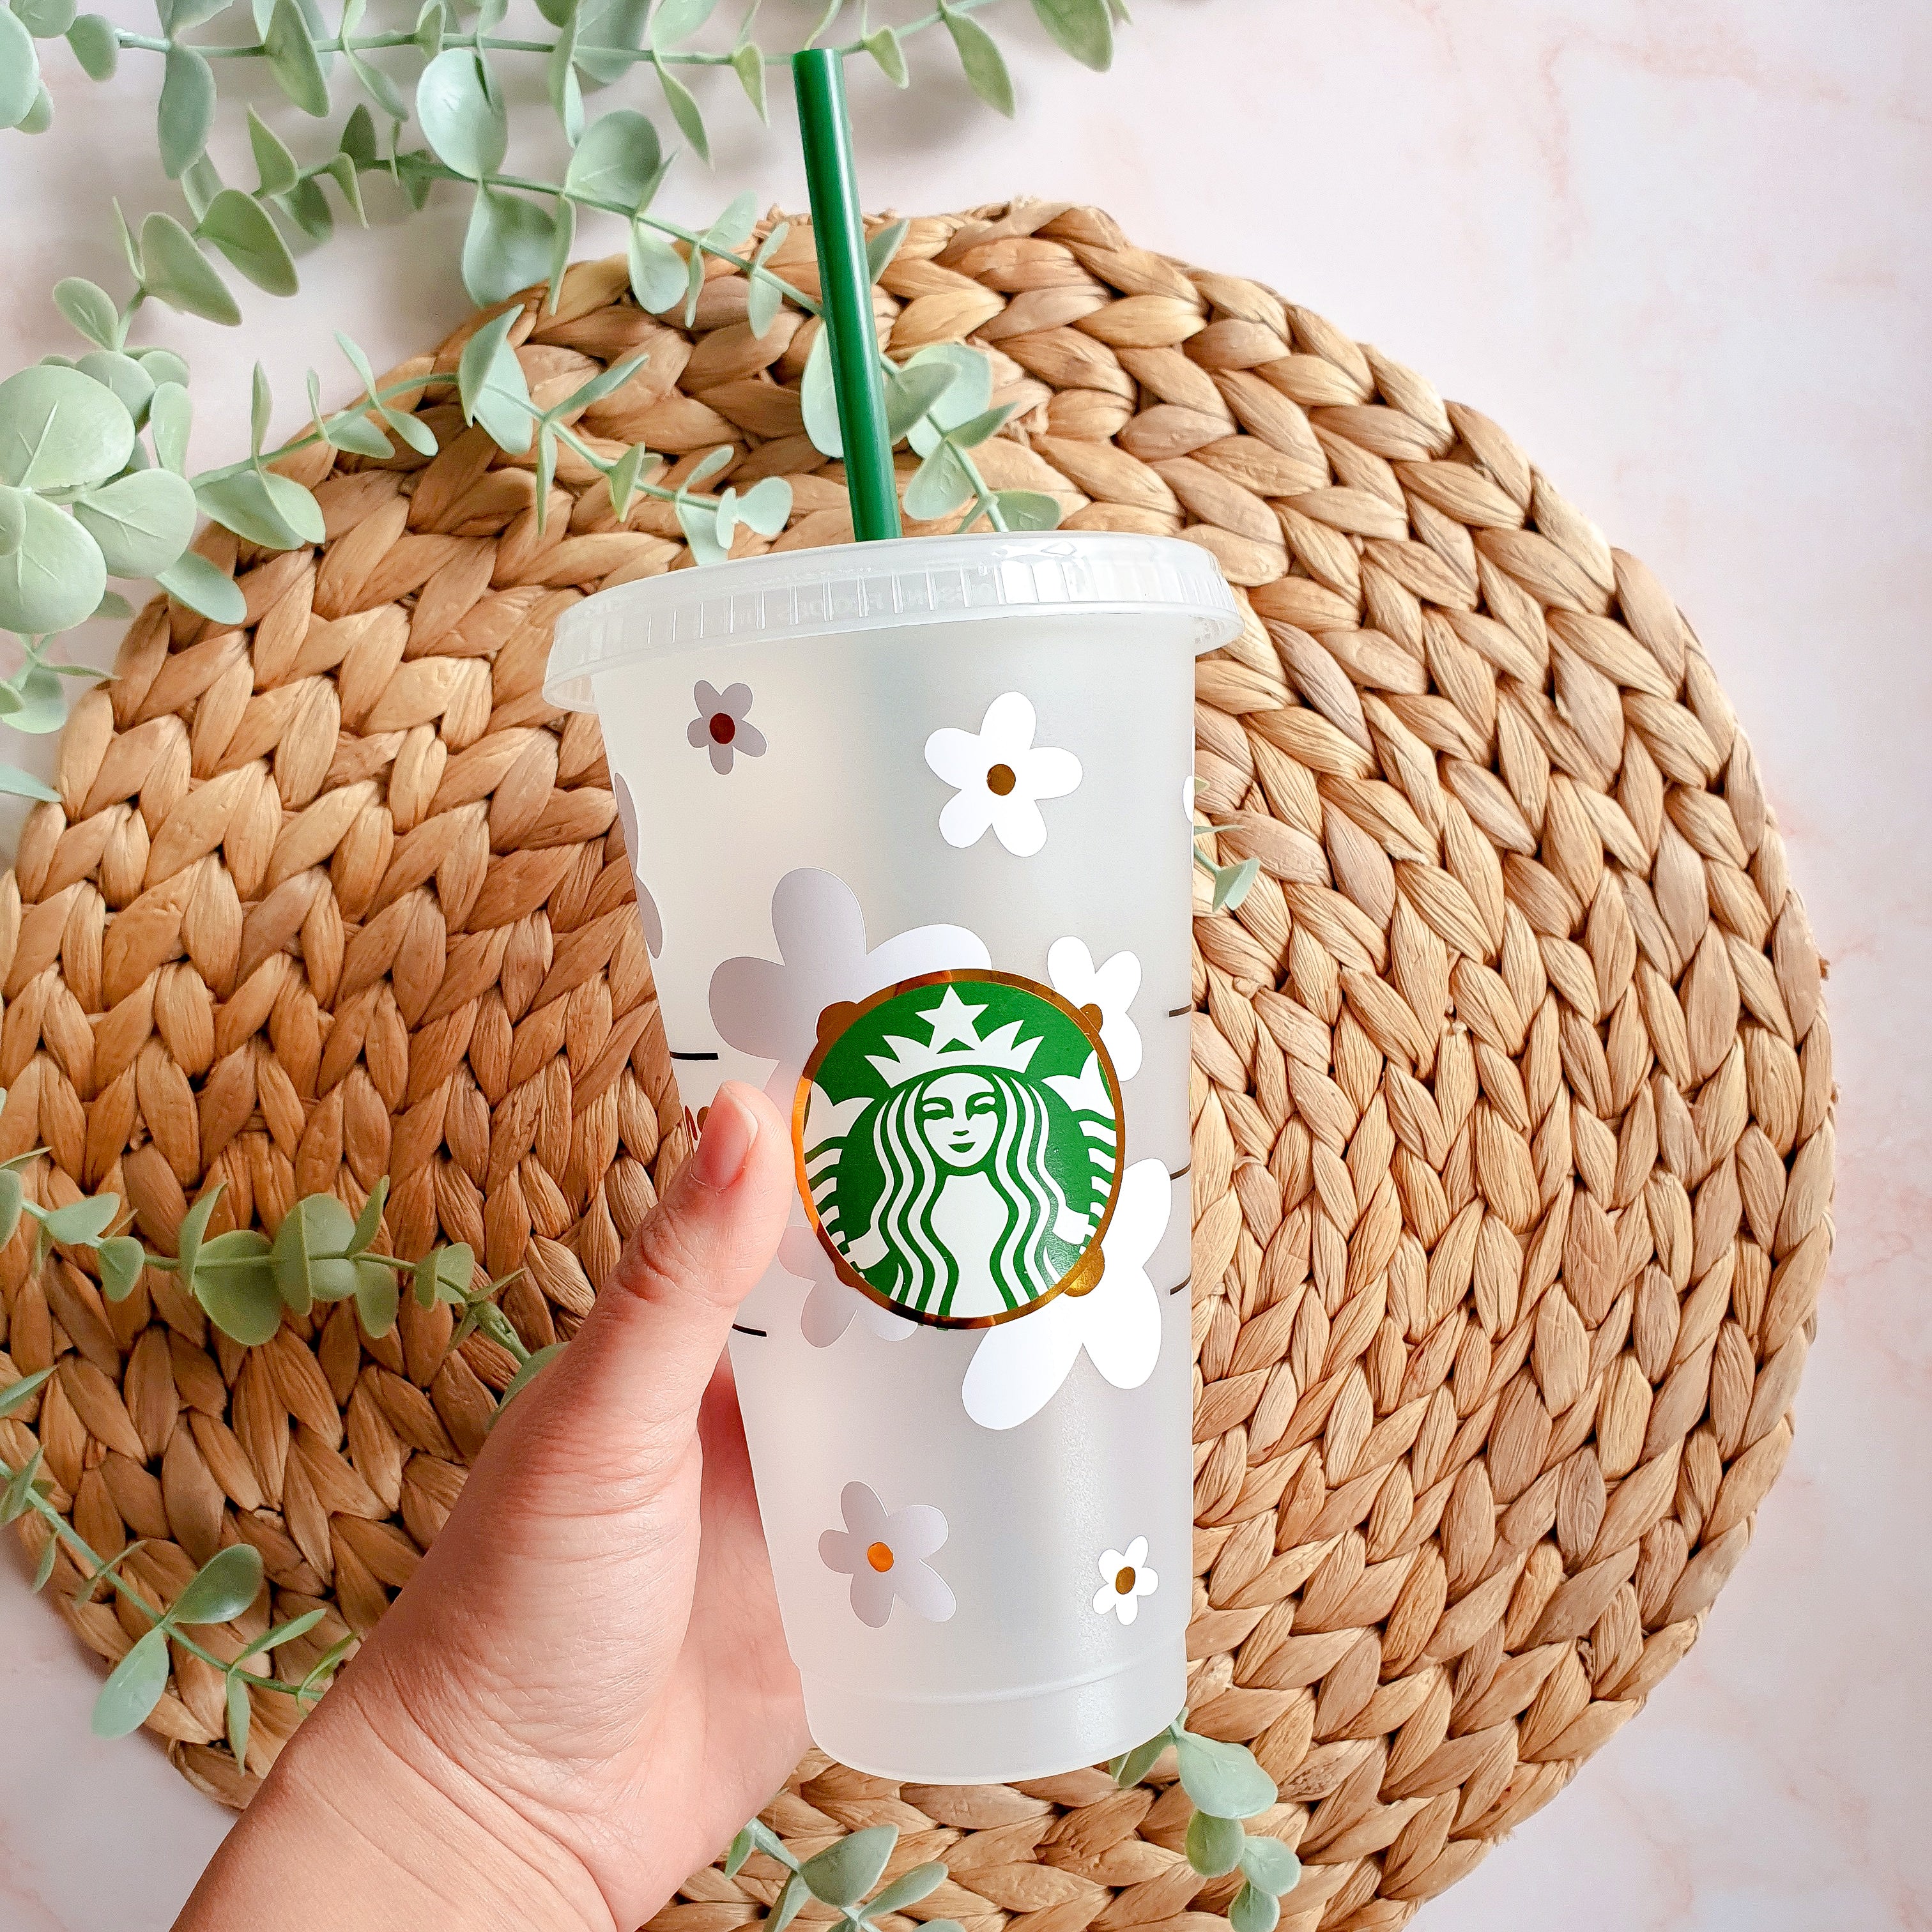 Personalized Starbucks Cup for Sale in Mesquite, TX - OfferUp